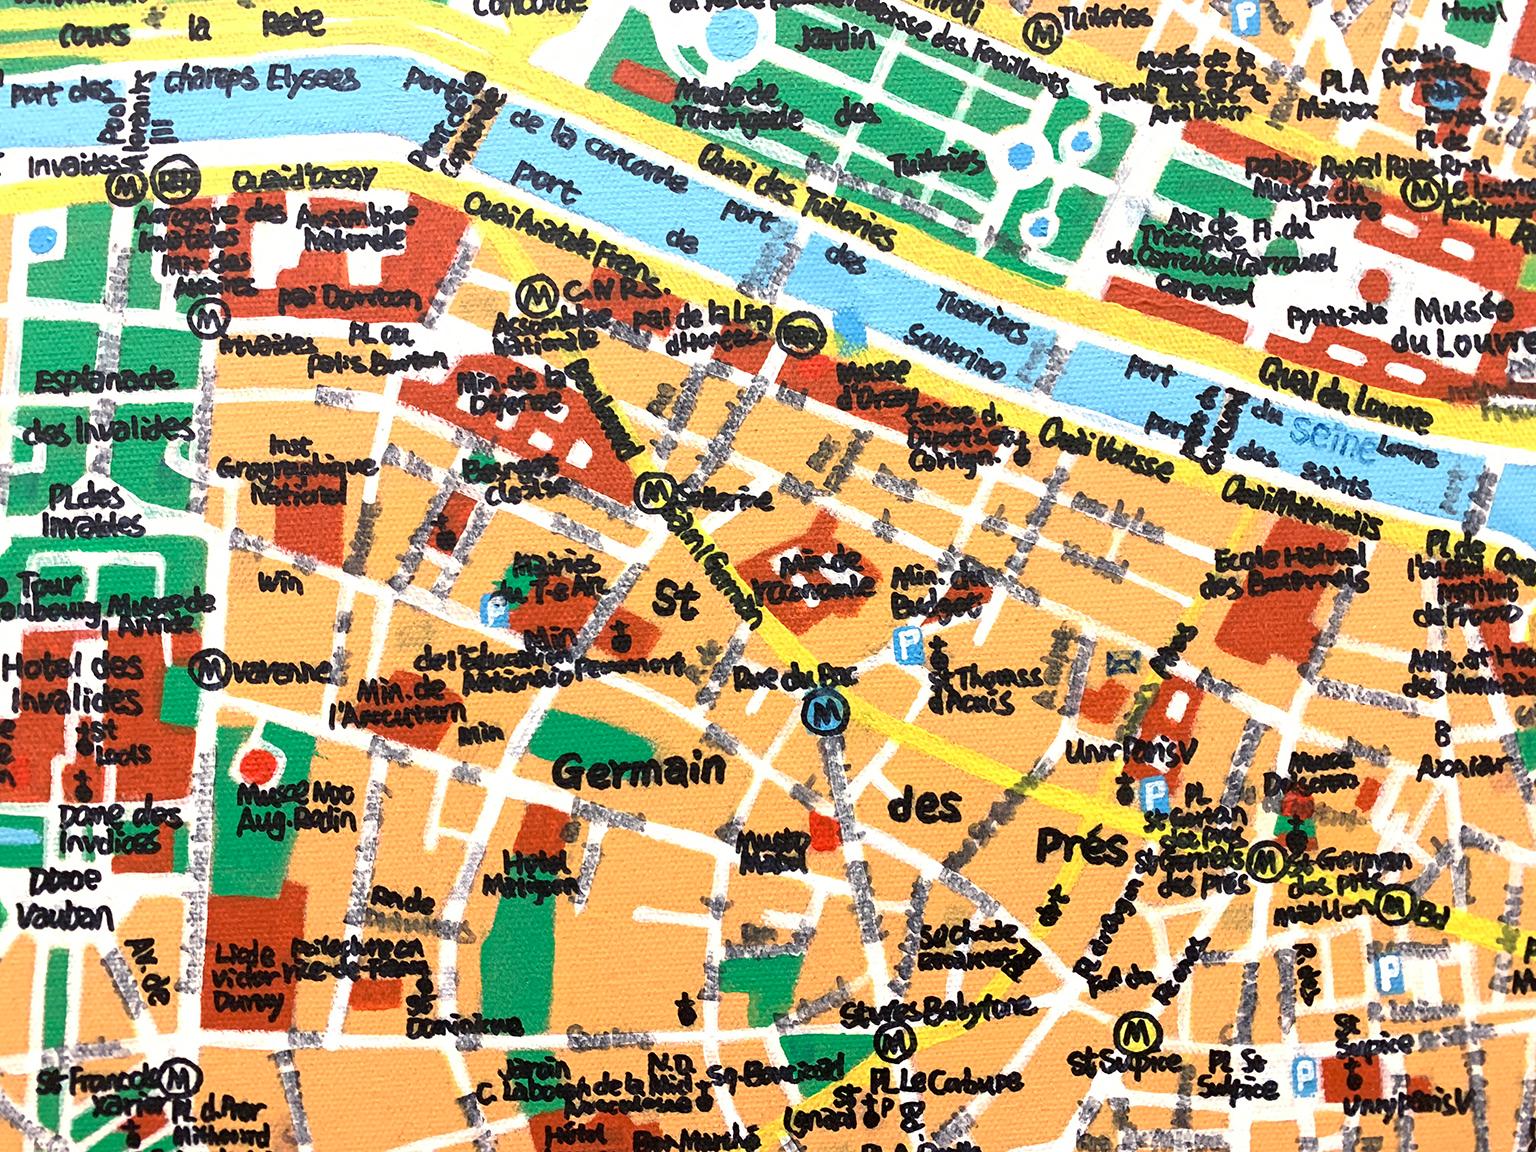 Map of Paris
2014
18.5”x20.5”x.75” inches
oil and ink on canvas

The painting, “Map of Paris”, is based off a popular postcard of Paris. By simplifying the city into a landscape of symbols, streets, and locations, the beauty and history of Paris